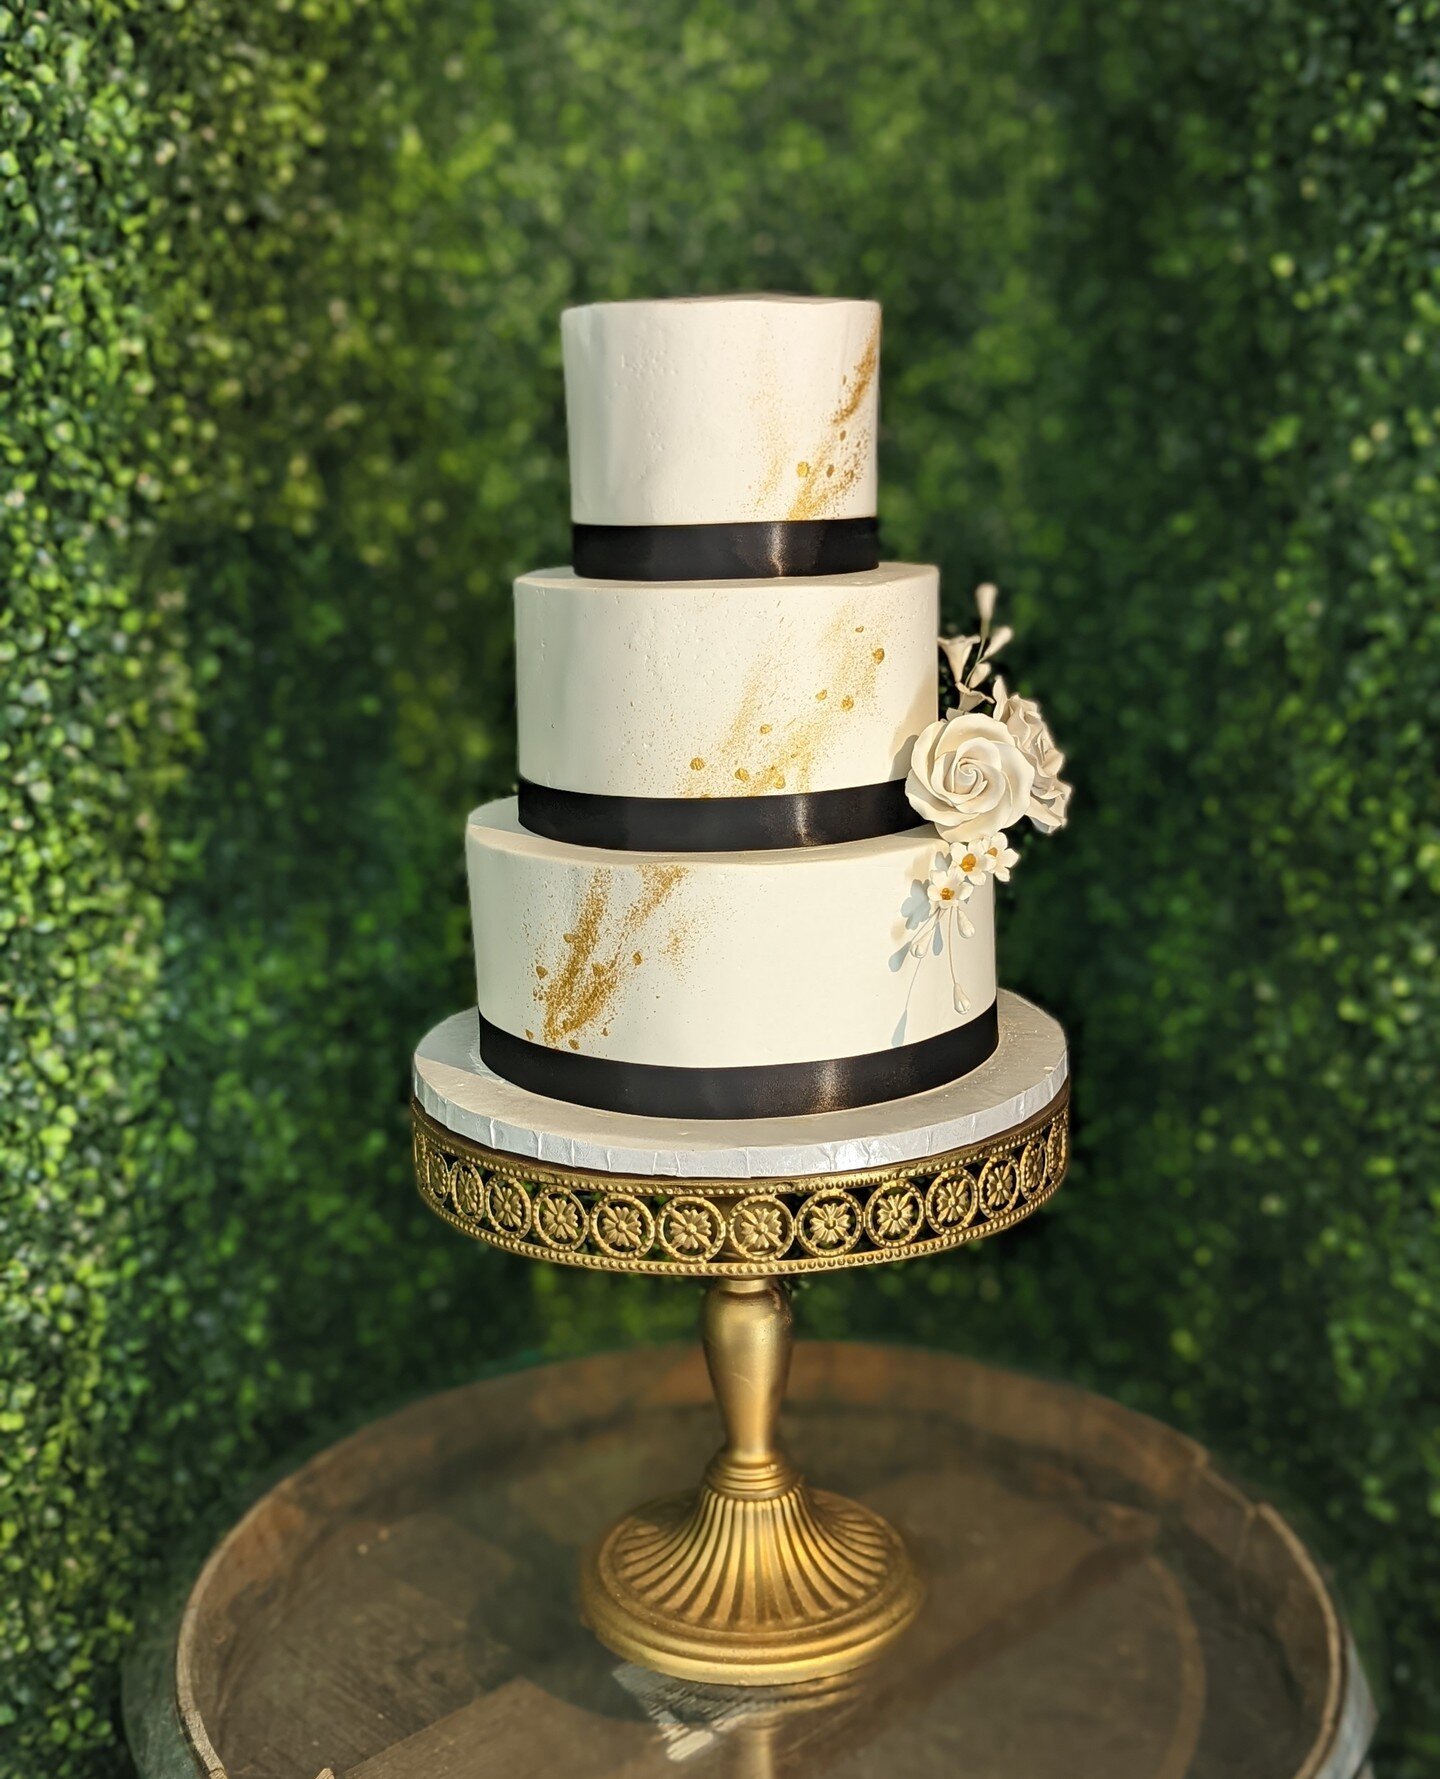 Gold splash wedding cake⁠
⁠
Have an upcoming wedding? Call us at⁠
(951) 699-2399 for a wedding consultation⁠
or visit our website at www.1914bakery.com for more info!⁠
⁠
#dessert #cakedesigner #flowers #temeculawine #chocolate #food #customcake #anni